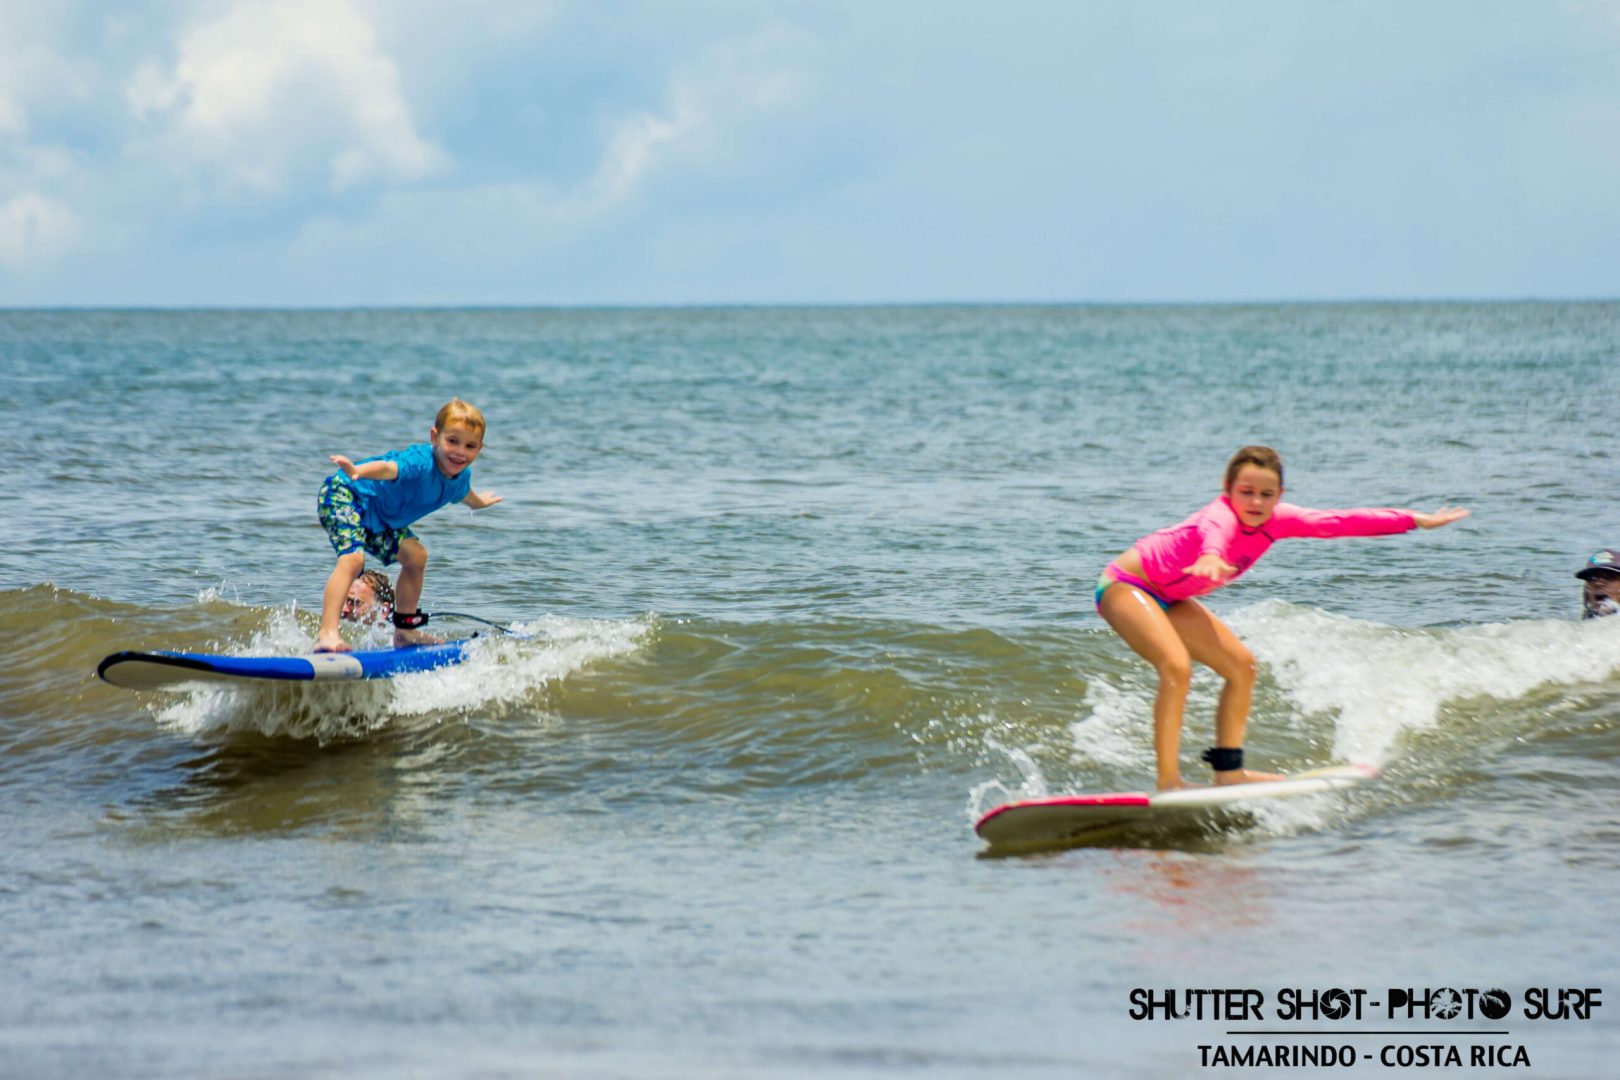 Two kids surfing the waves in Costa Rica 